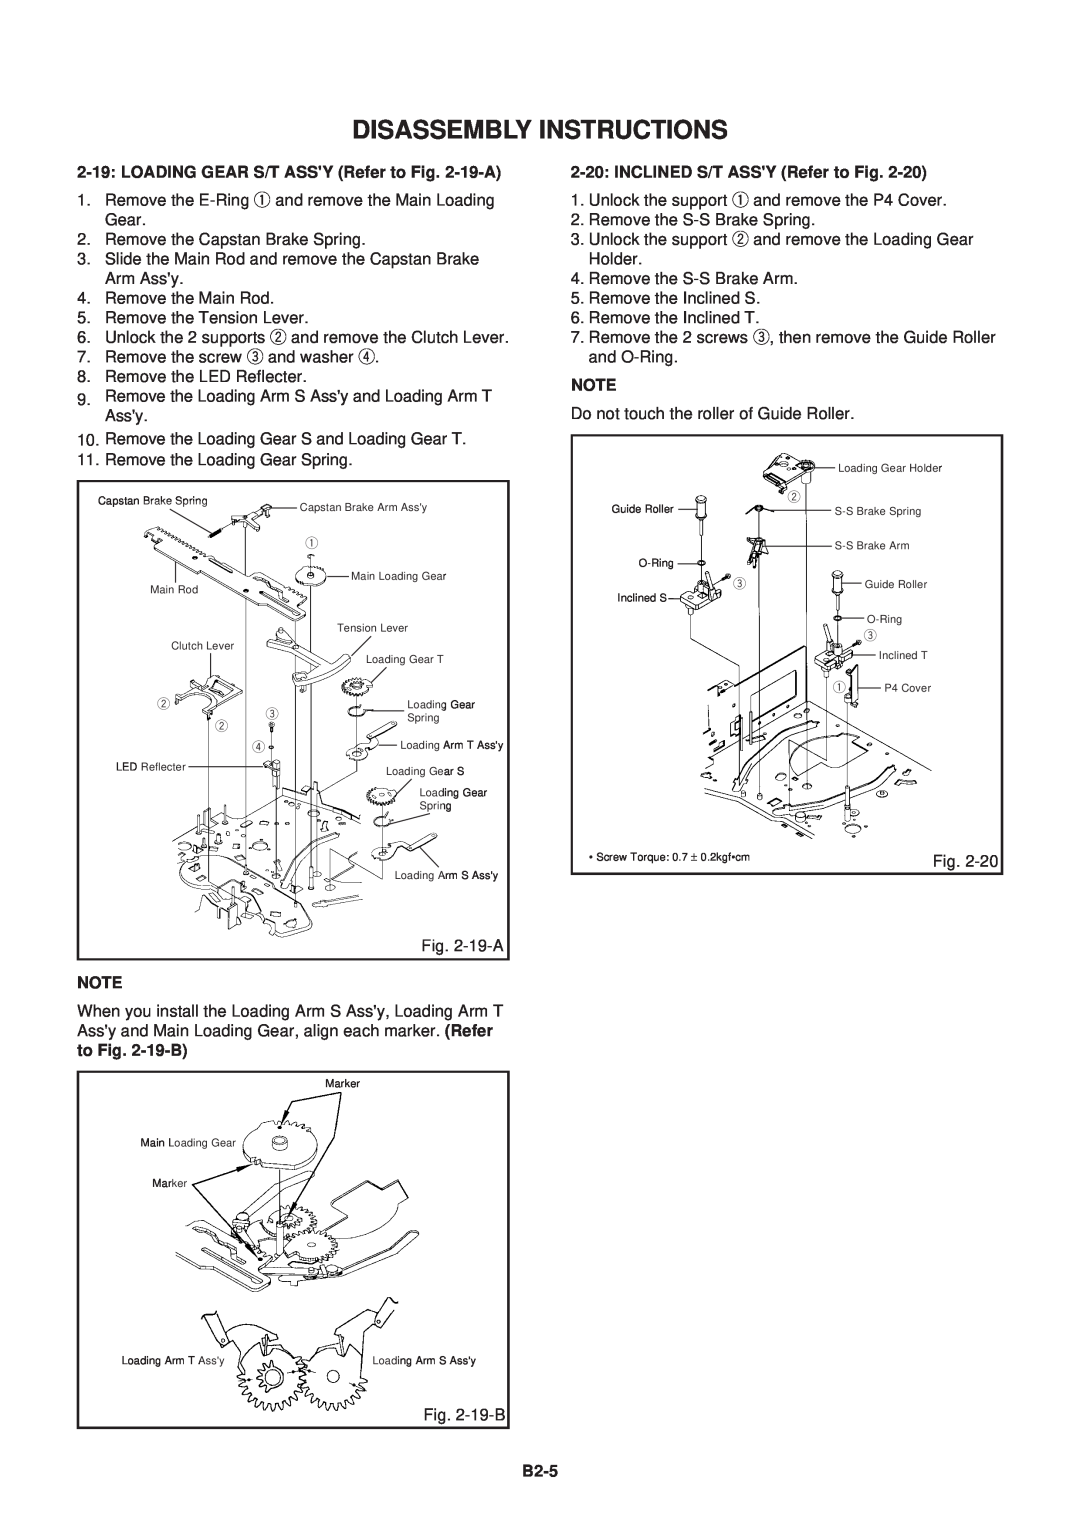 Aiwa HV-FX5100 Disassembly Instructions, LOADING GEAR S/T ASSY Refer to -19-A, INCLINED S/T ASSY Refer to Fig, B2-5 